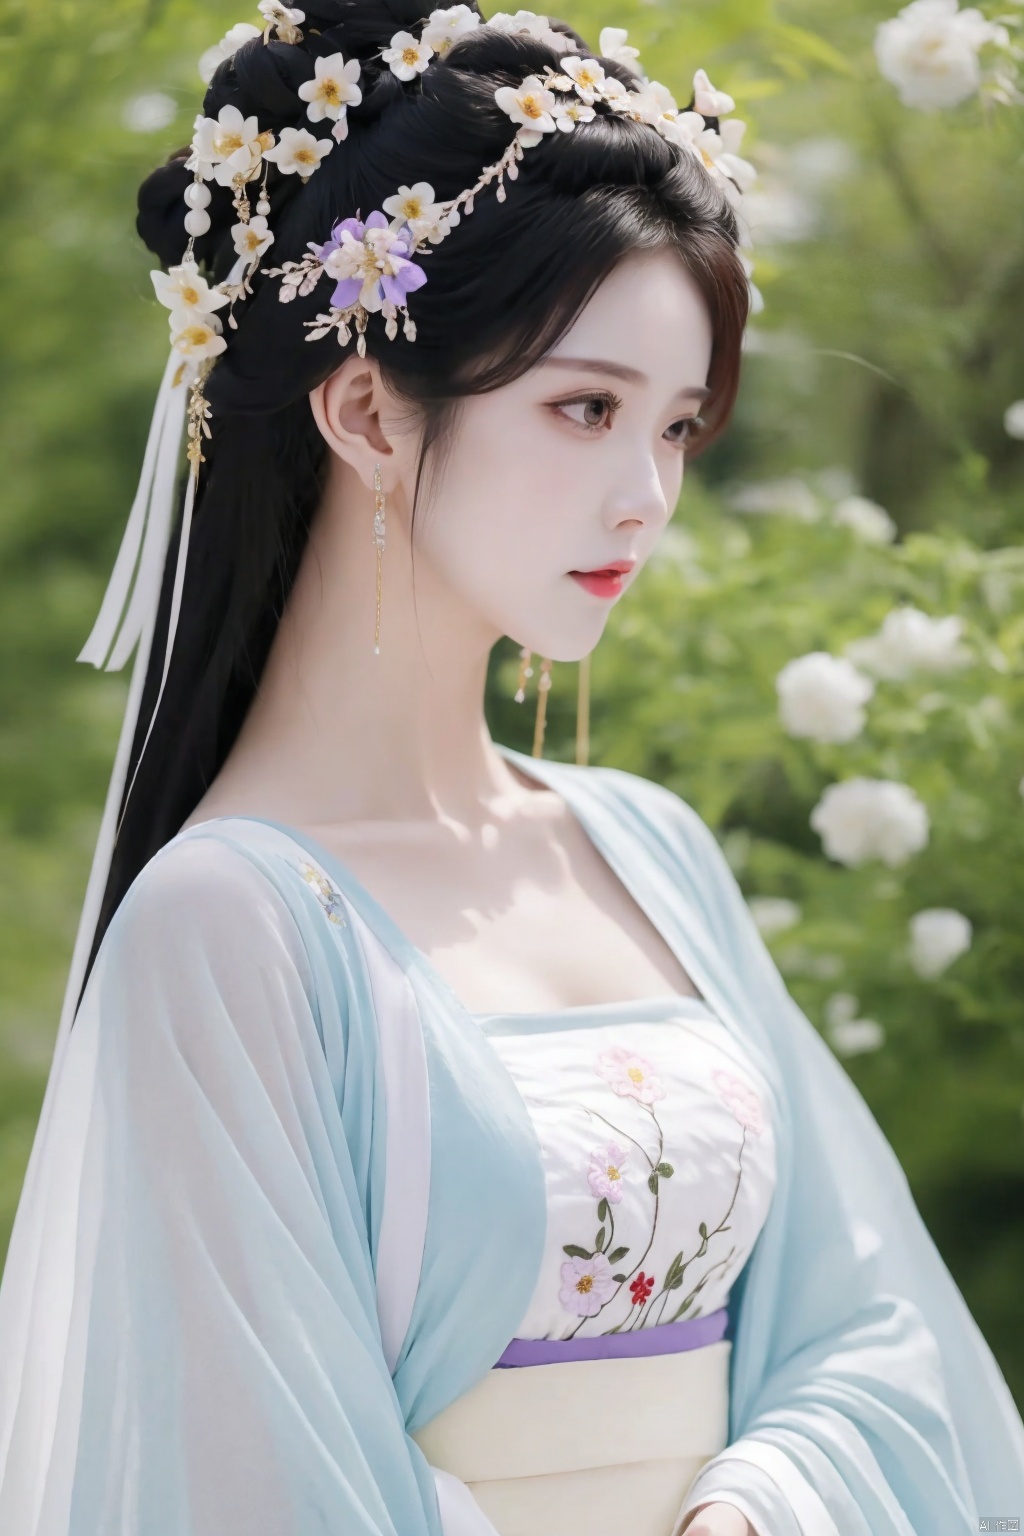 1 girl,Shining diamond earrin,embroidery,lace,Hairpin,head ornament,A garden in full bloom,scenery close by,Hanfu,chest,Plump breasts,cleavage,scenery close by,Upper body portrait,purple,yellow,red